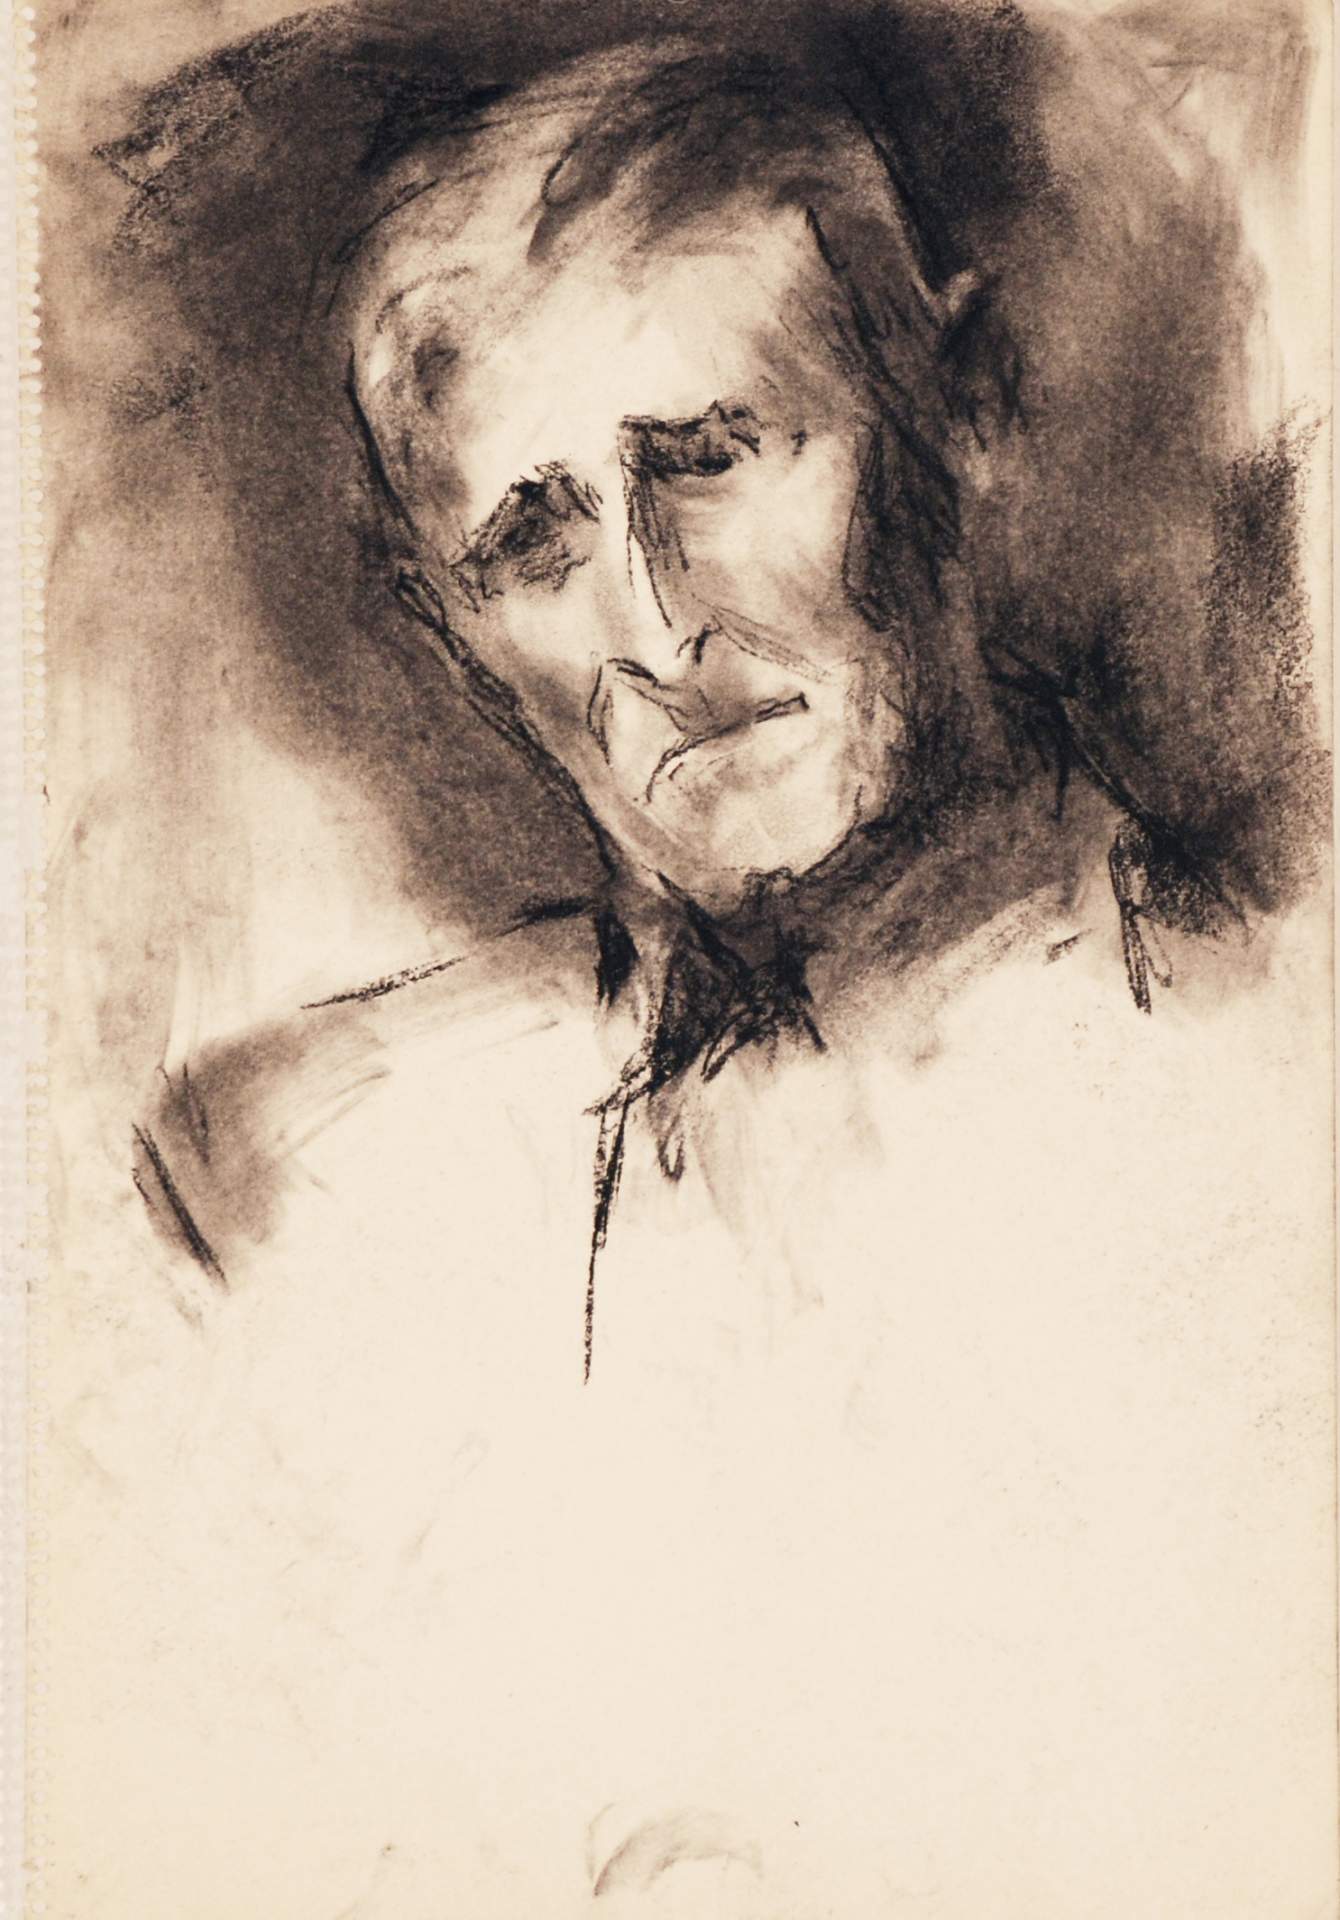 Untitled [portrait of a man's head]